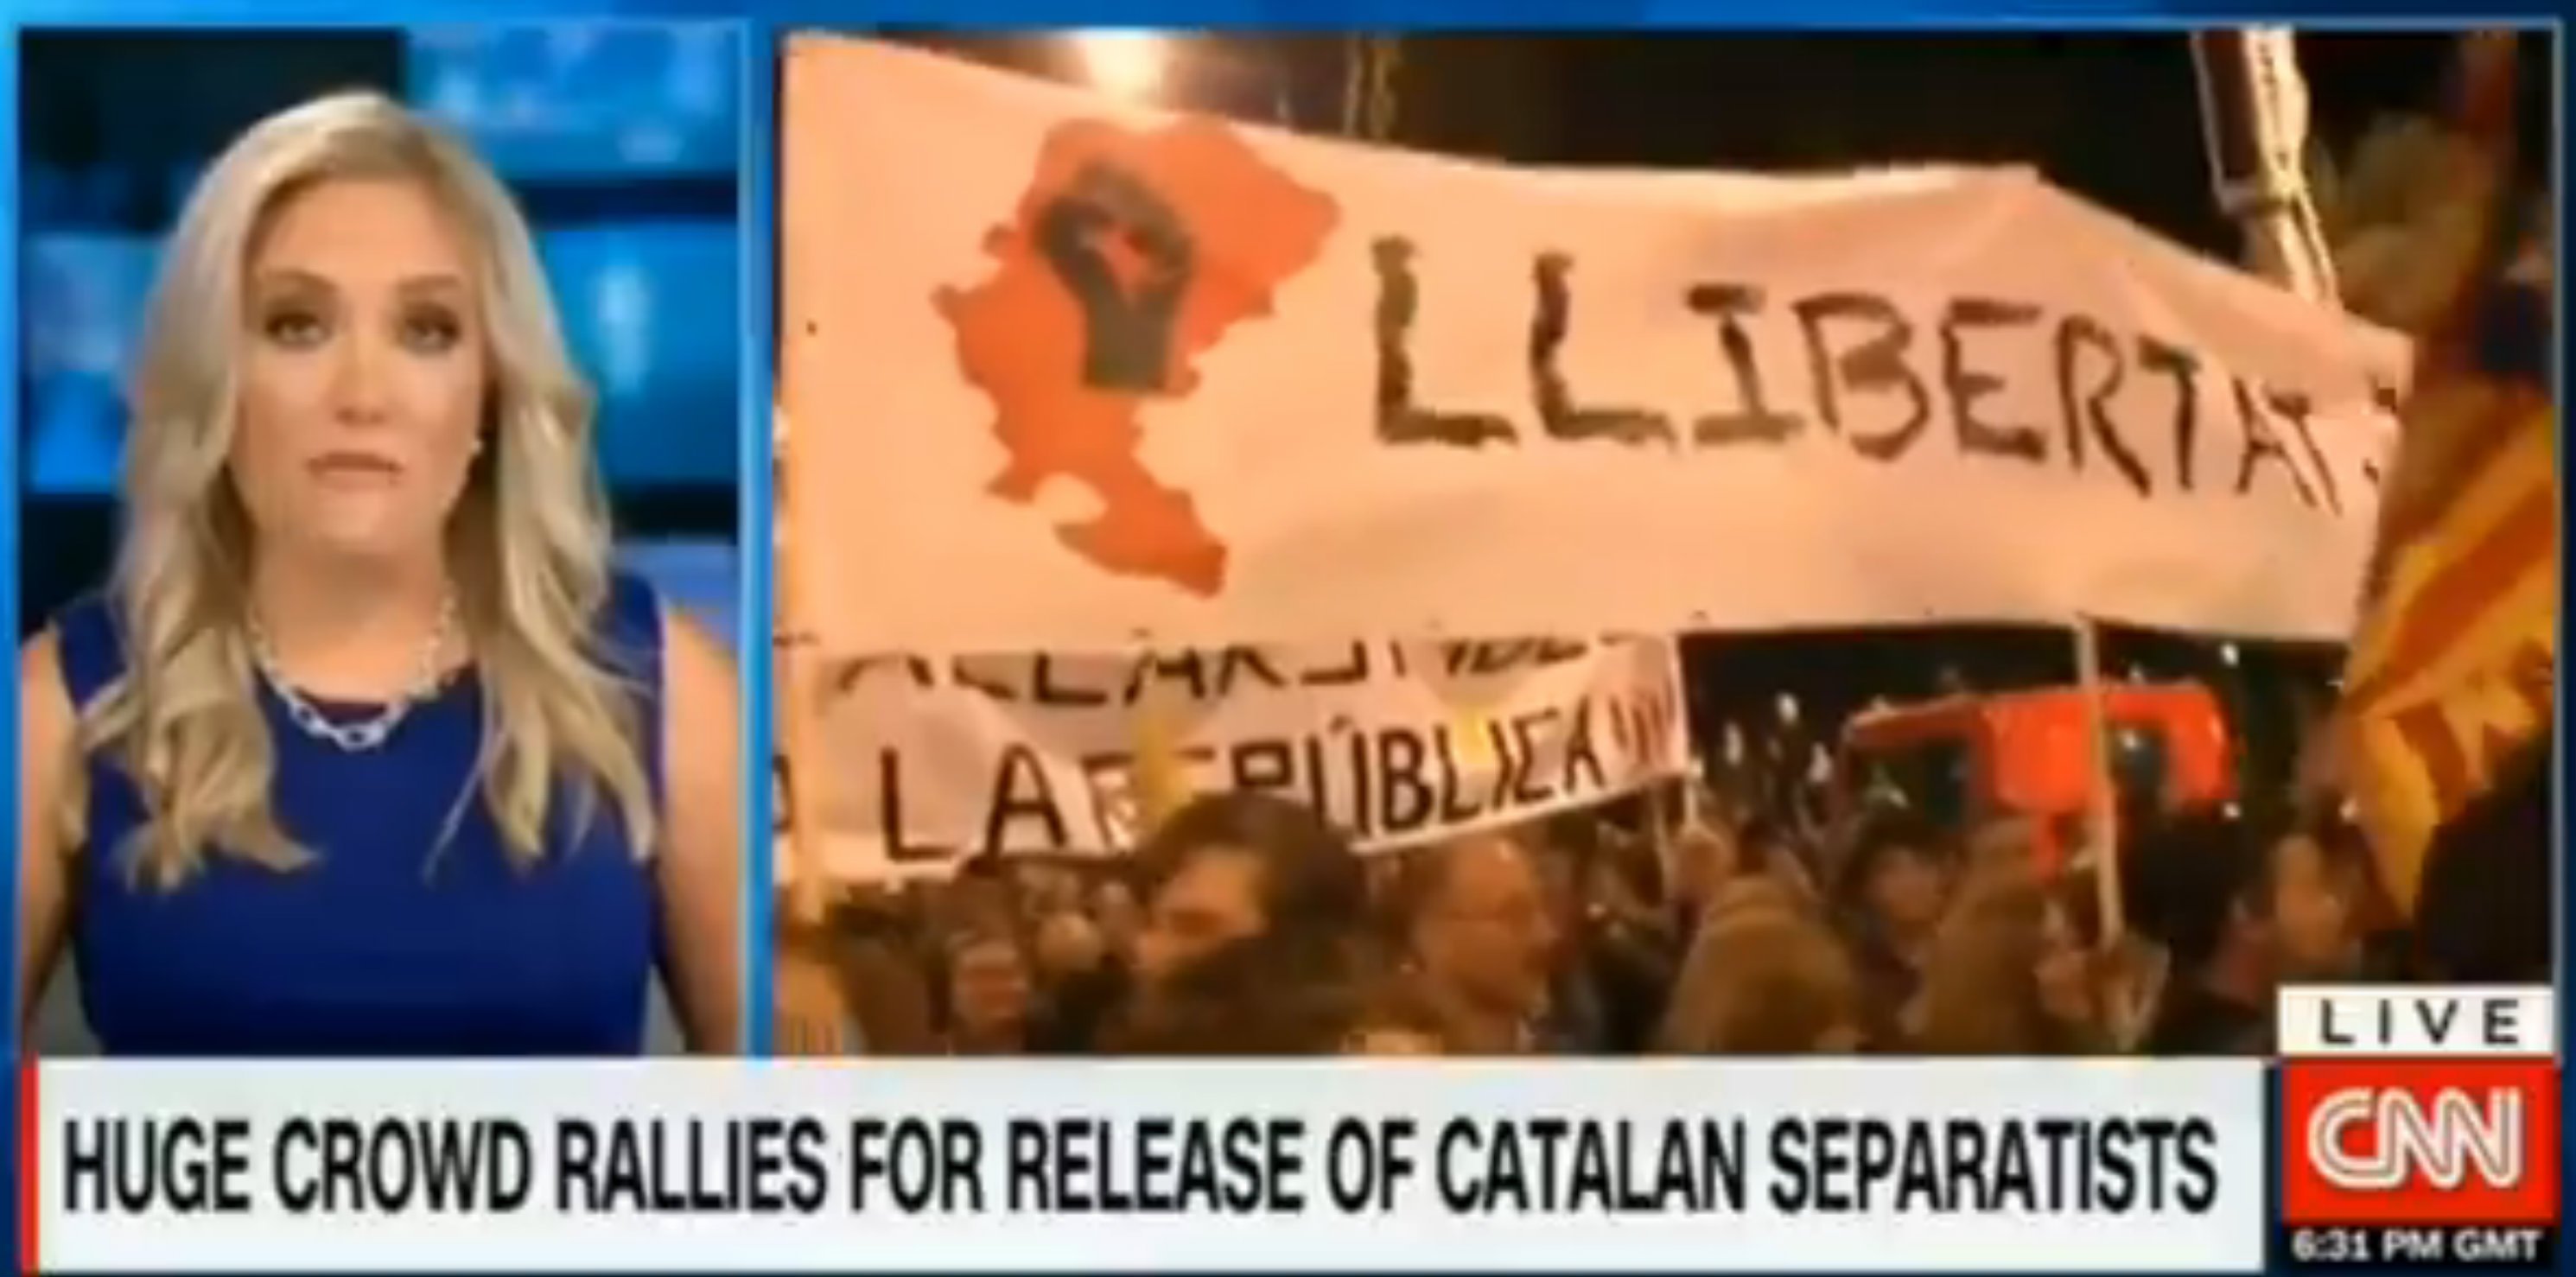 CNN broadcasts today's rally for the prisoners live from Barcelona